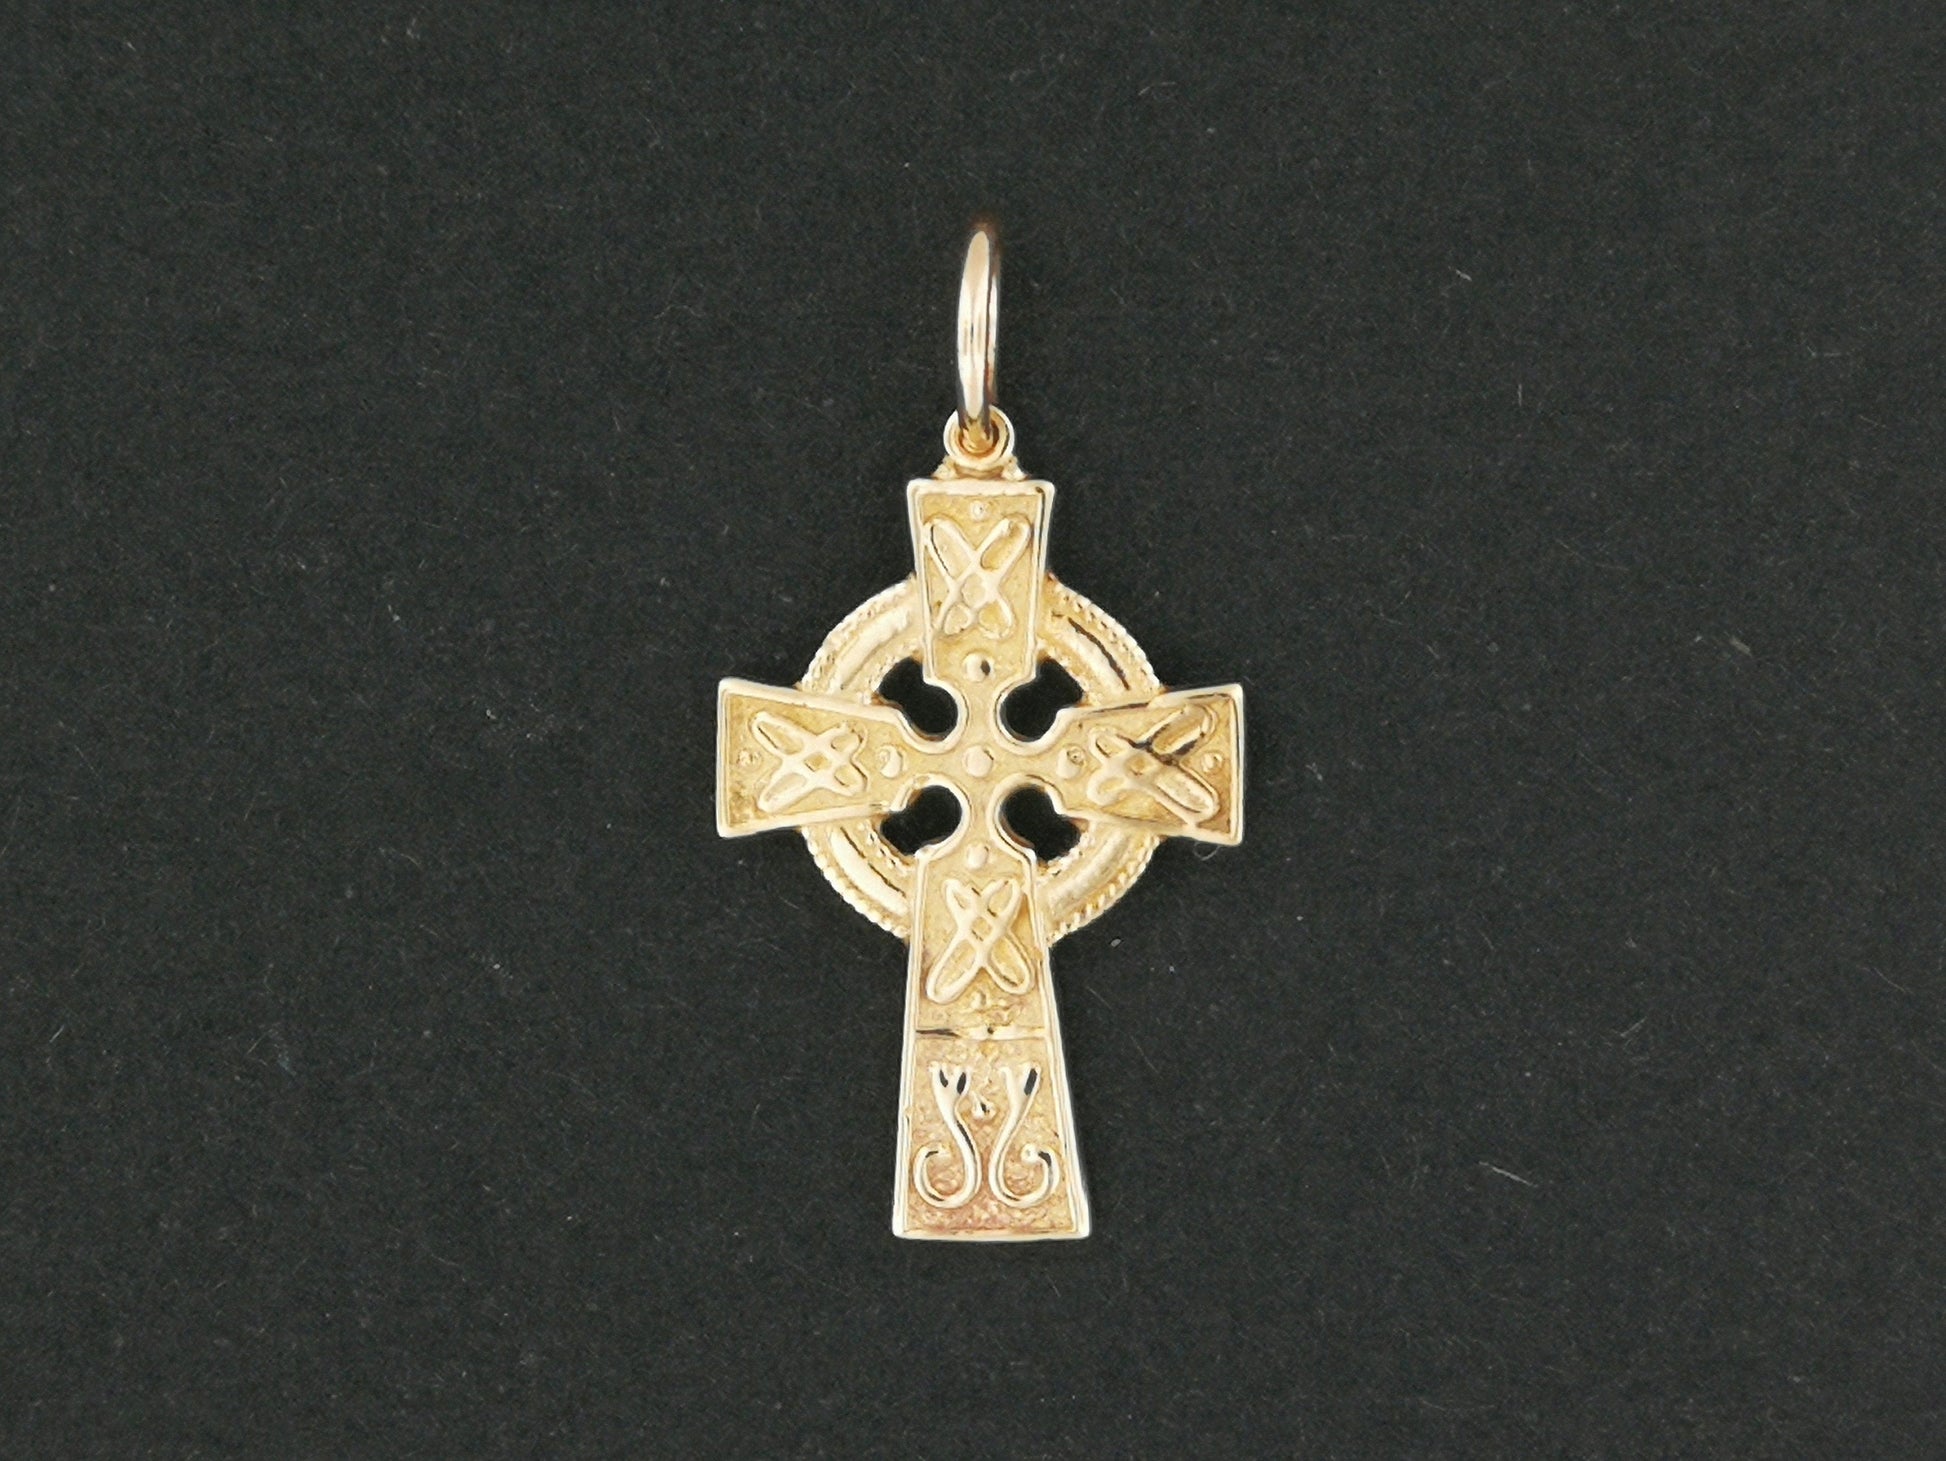 Small Celtic Cross in Gold Made to Order, Gold Celtic Cross, Gold Irish Cross, Celtic Irish Cross Pendant, Gold Cross Pendant, Gold Celtic Jewellery, Gold Celtic Jewelry, Gold Irish Celtic Cross, Gold Celtic Pendant, Irish Celtic Cross Pendant